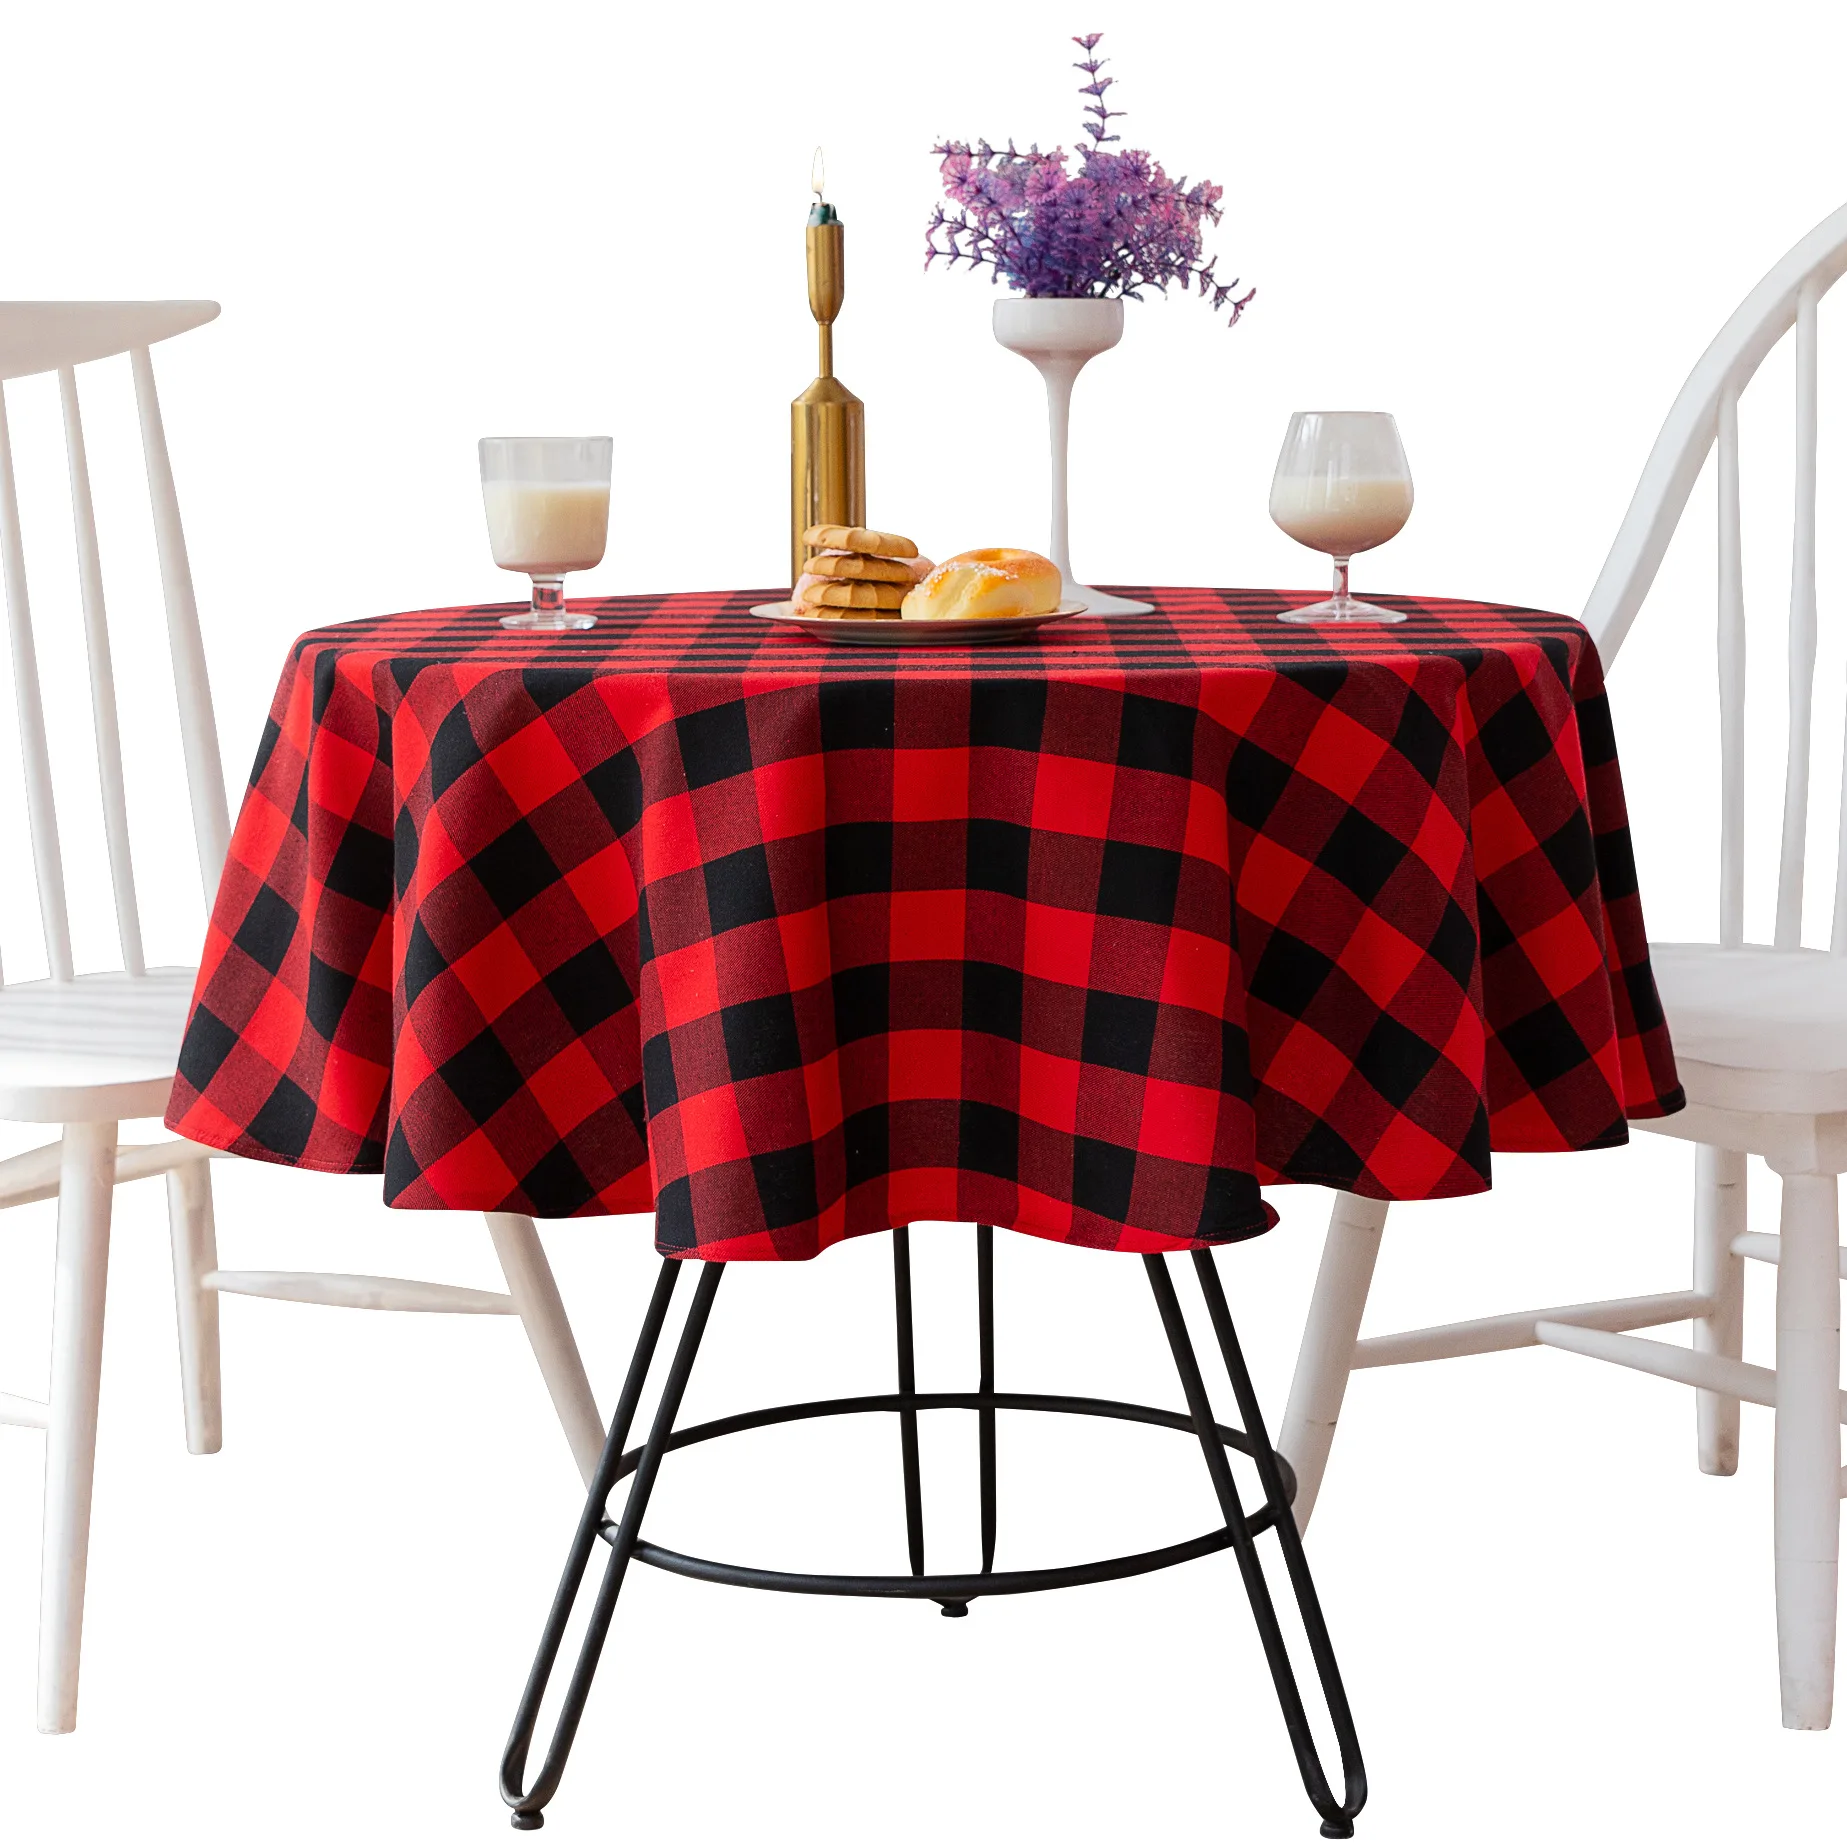 

Tablecloths Red Black Grid Party Decorative Hotel Restaurant Round Dining Pad home table cloth Tablecloth Placemat decoration